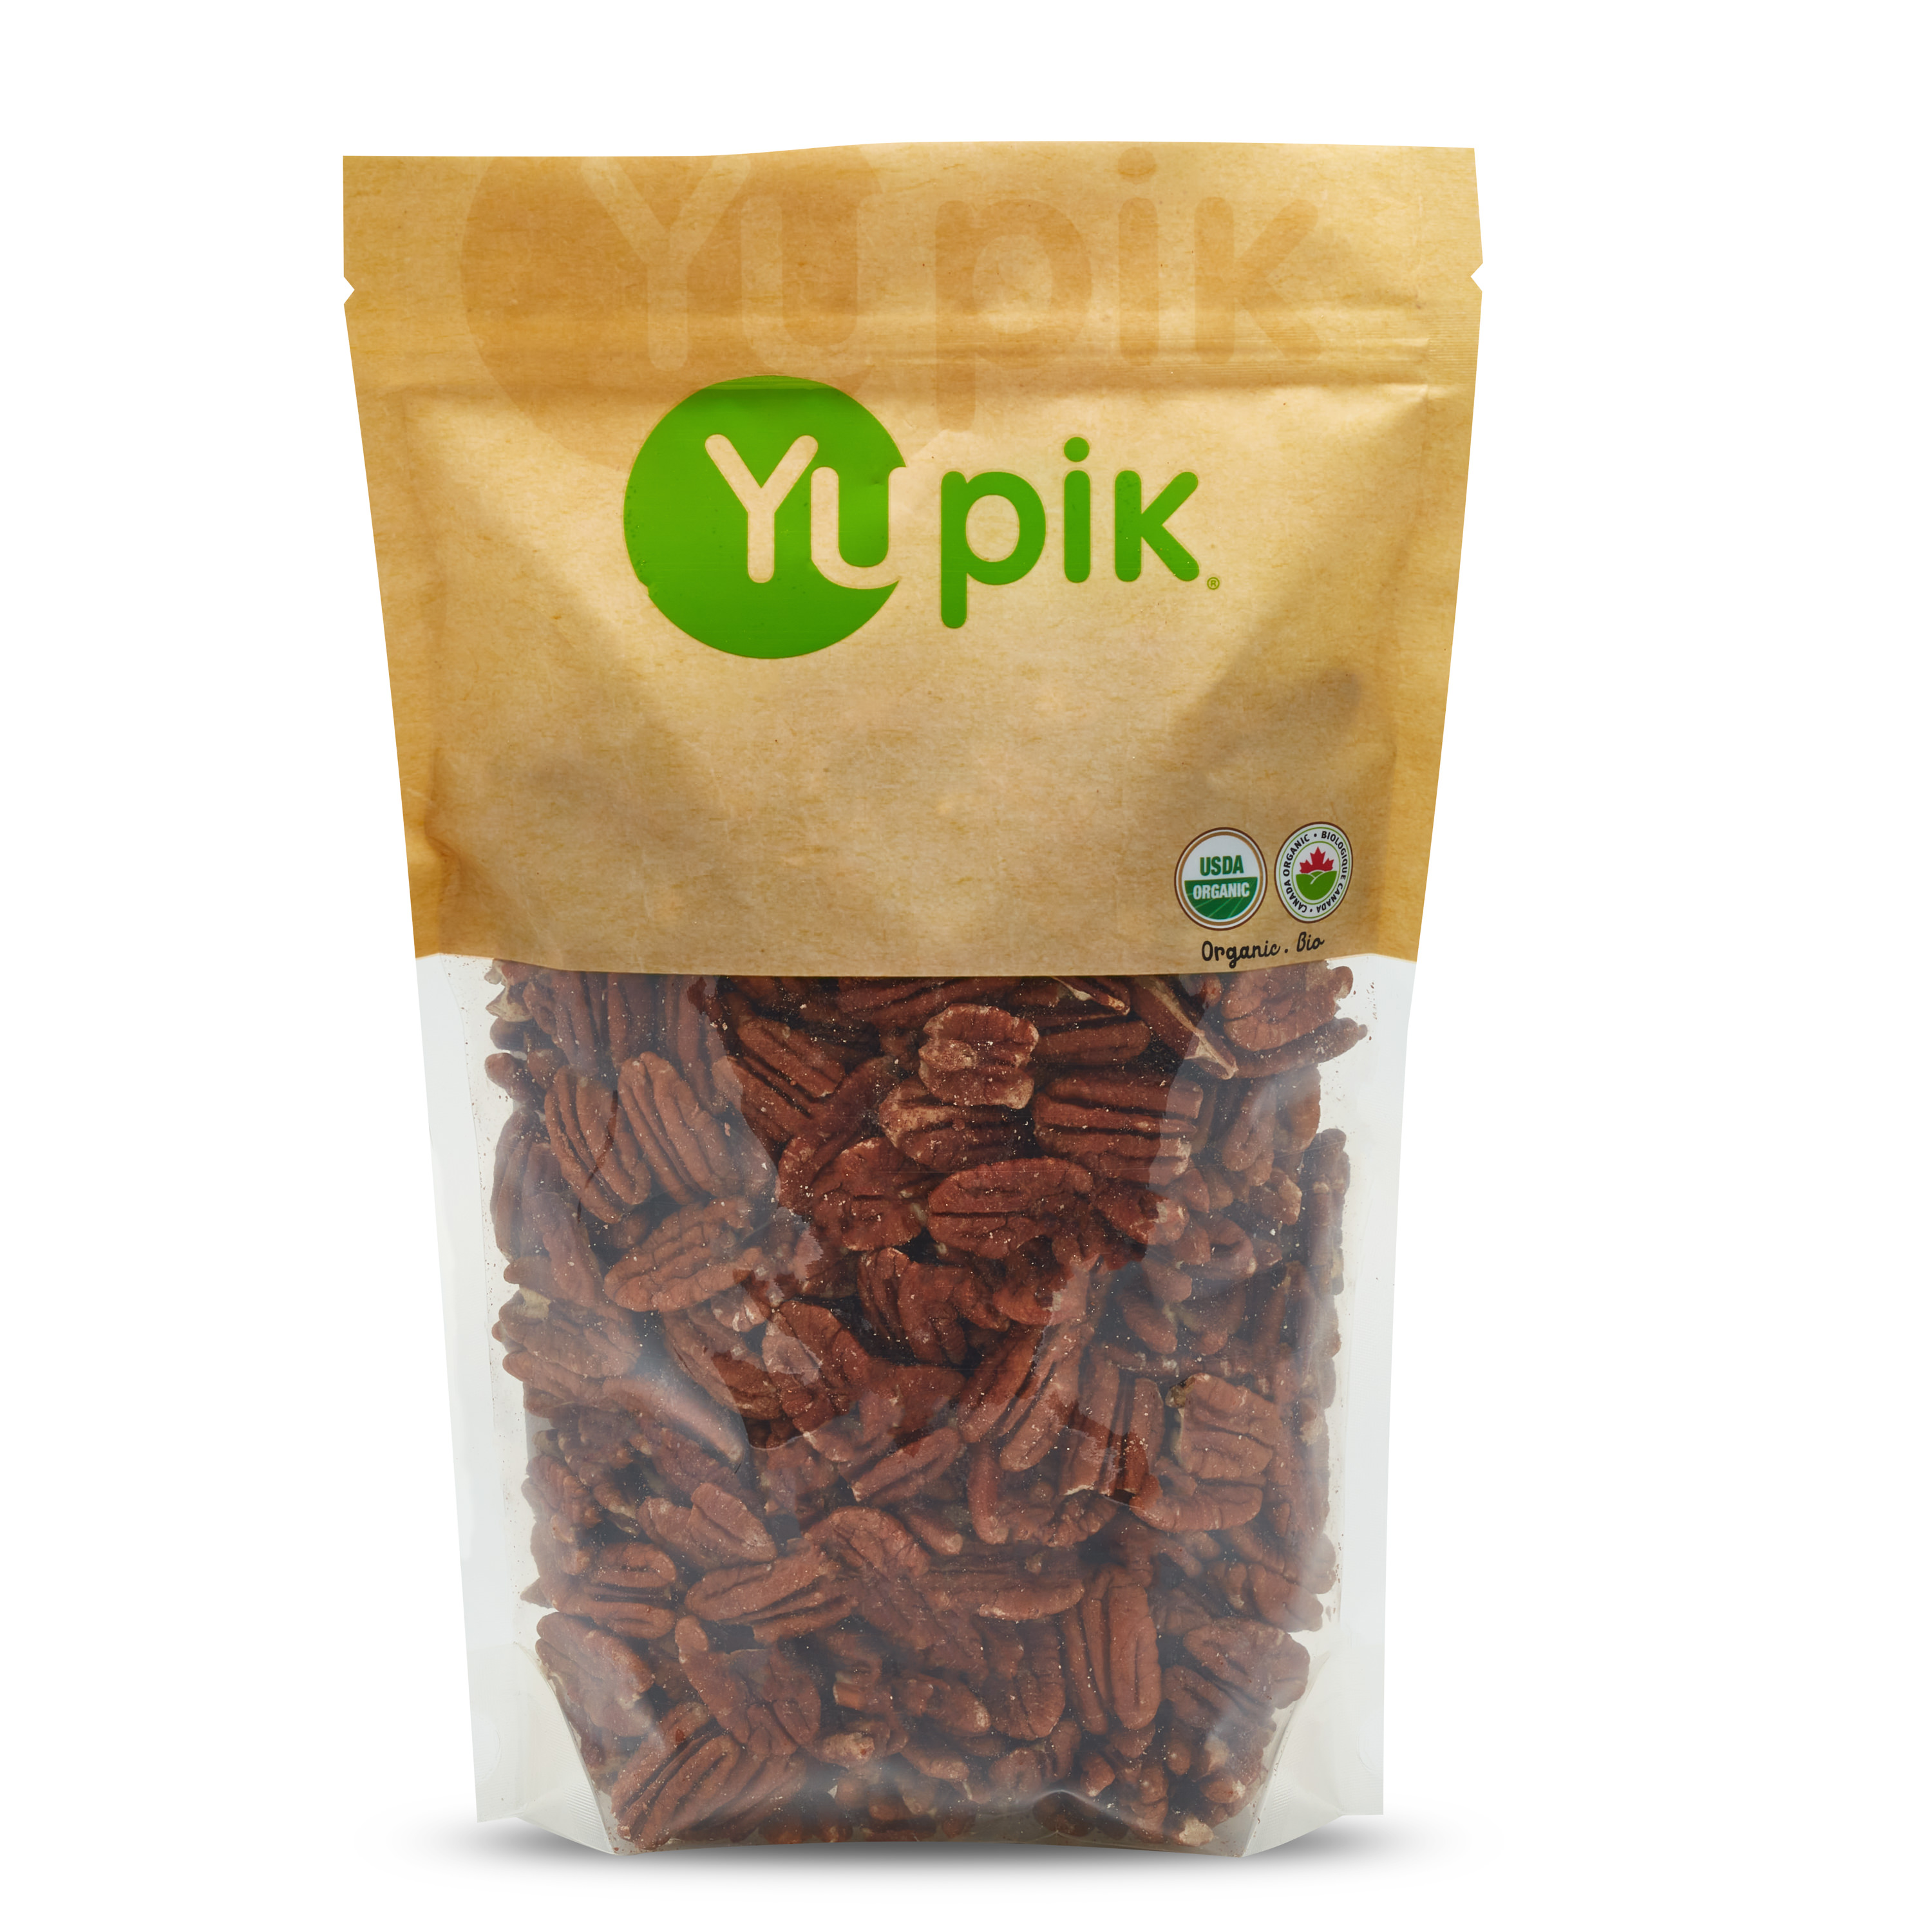 Organic pecans.This product may occasionally contain small shell pieces